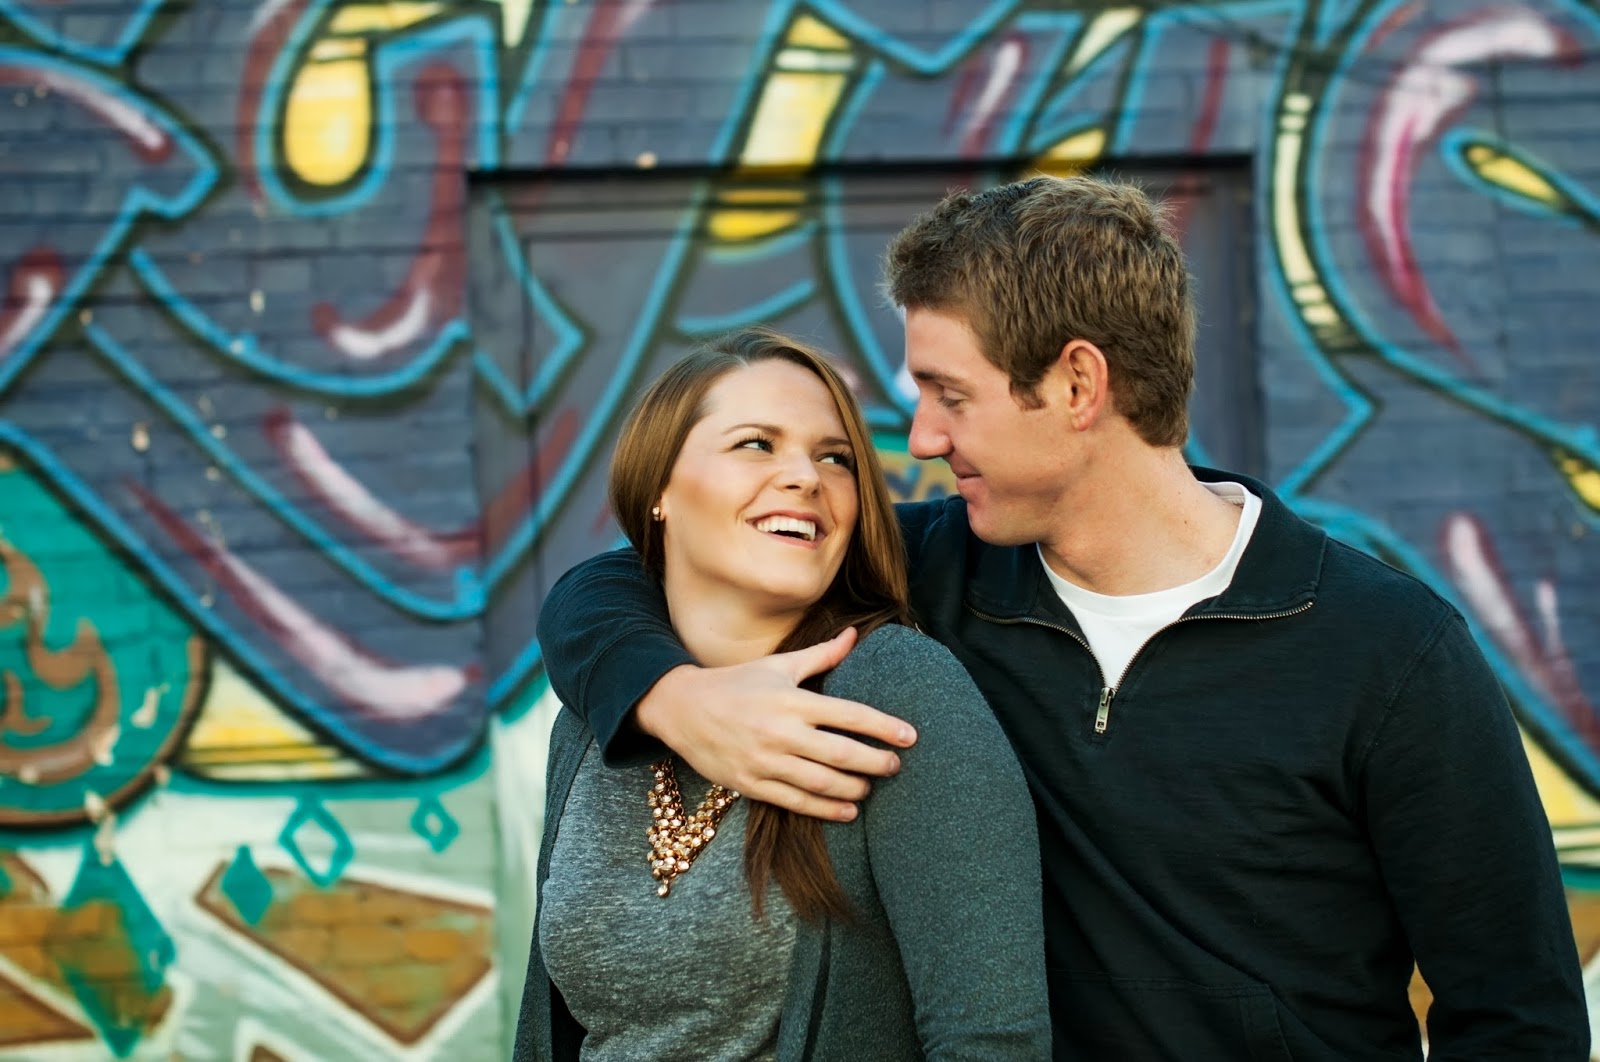 beautiful couple session with utah photographer j&h photography